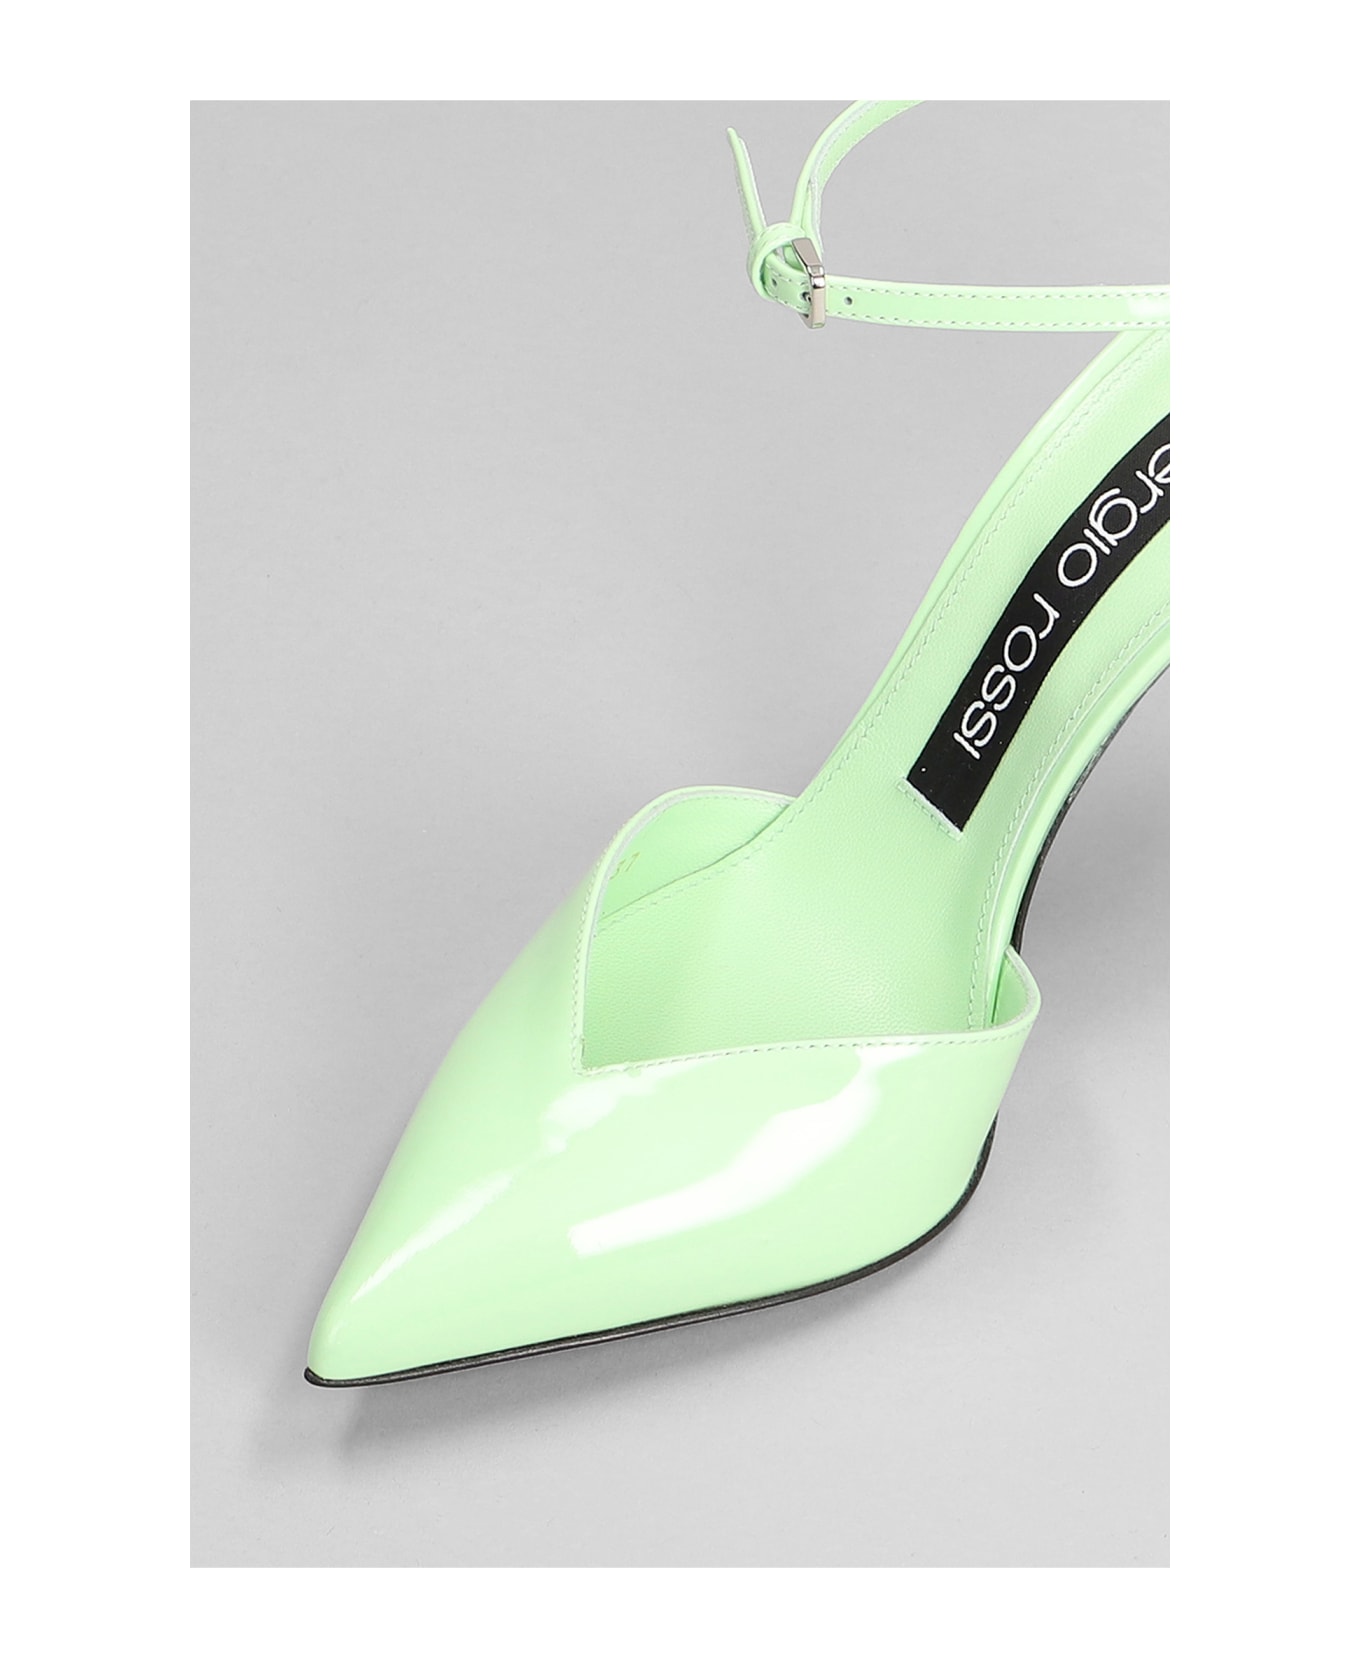 Sergio Rossi Pumps In Green Patent Leather - green